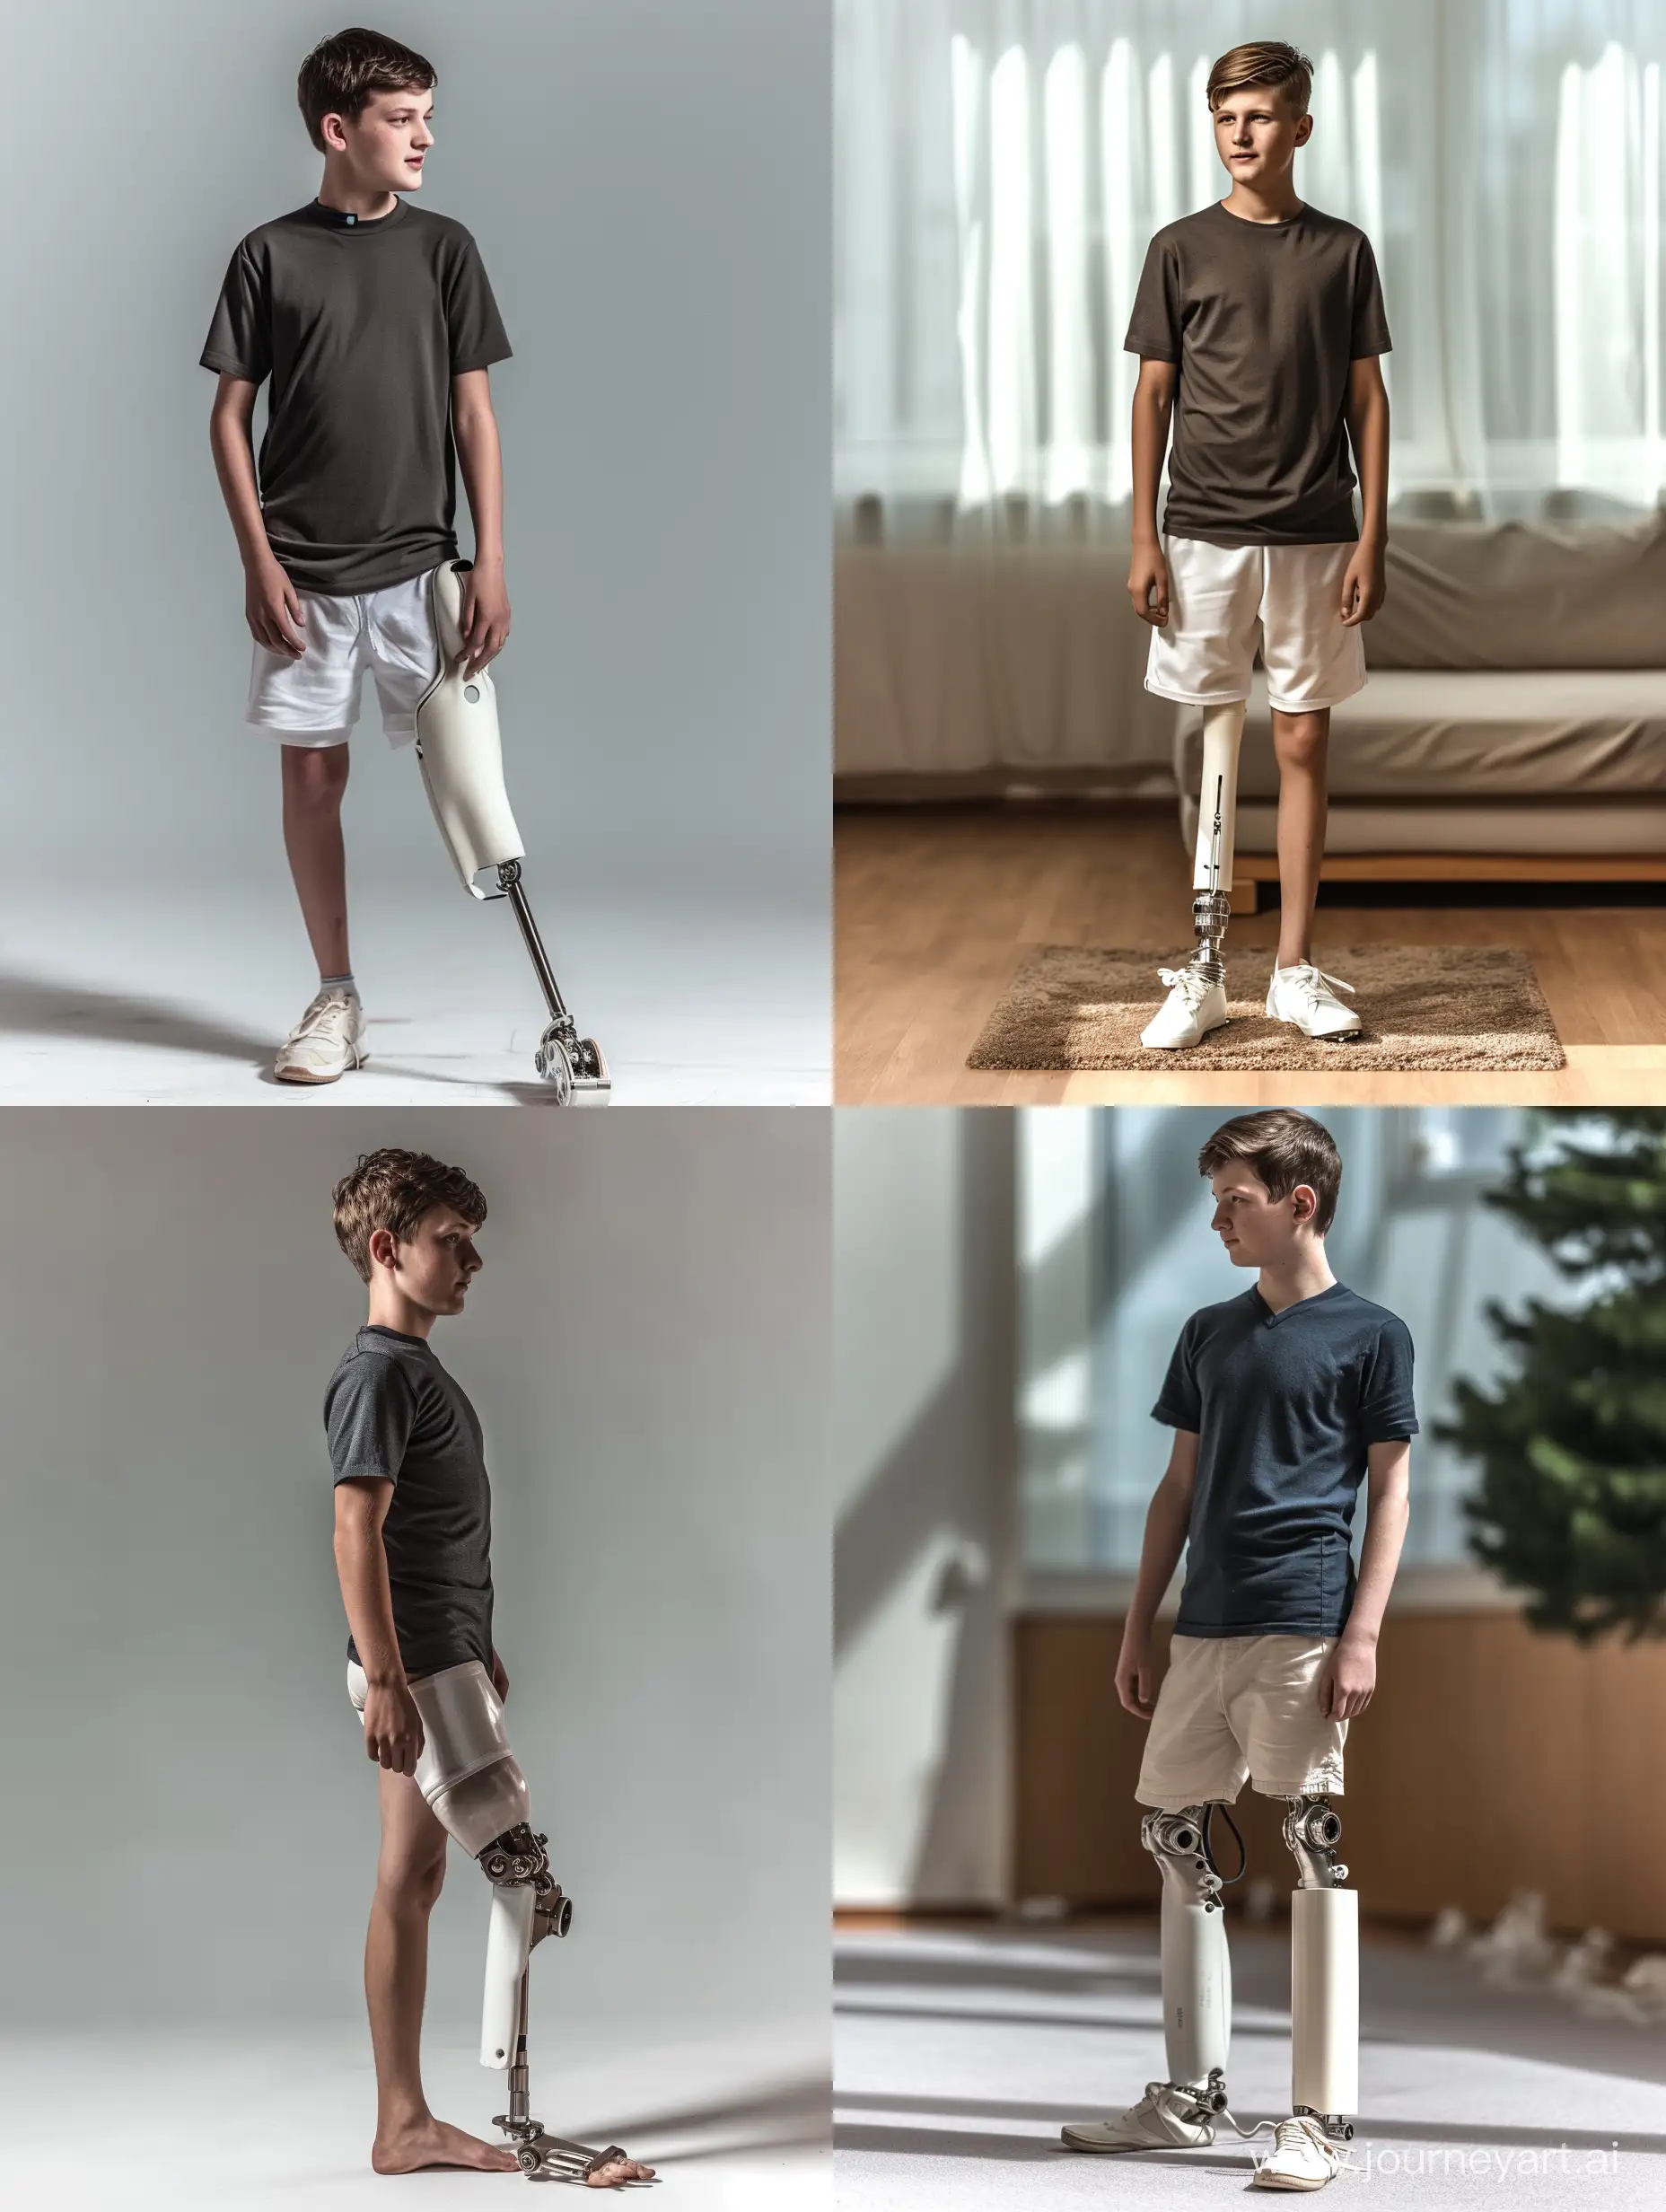 Ultrarealistic-Teenager-Showcasing-New-White-Transtibial-Prosthesis